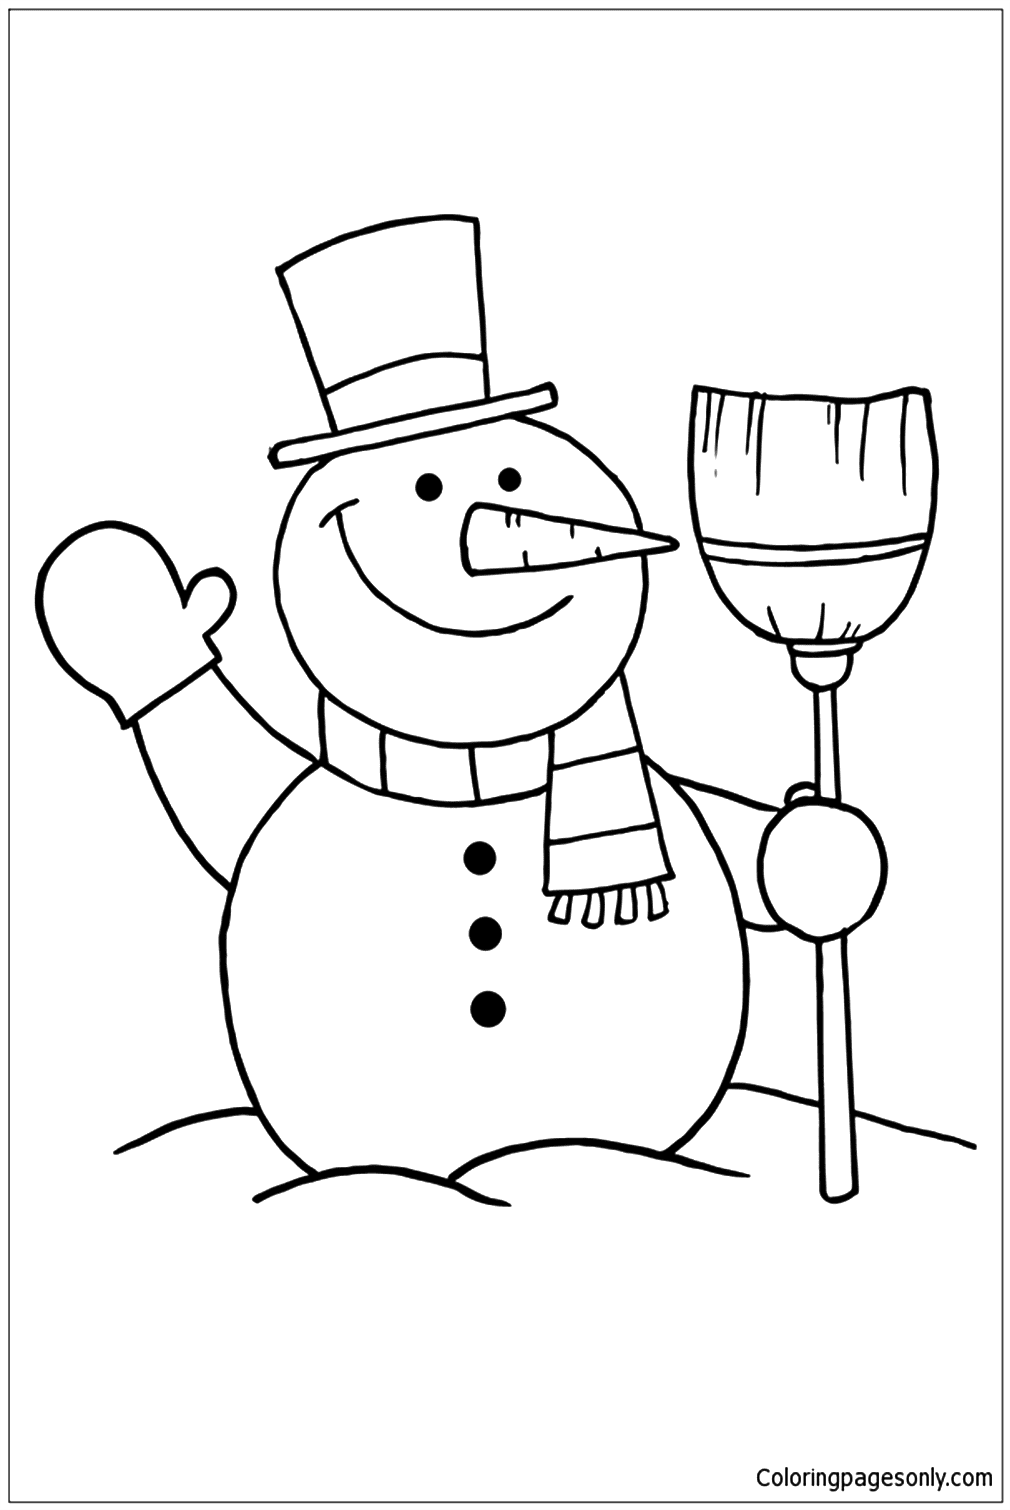 The Snowman In Winter Coloring Page